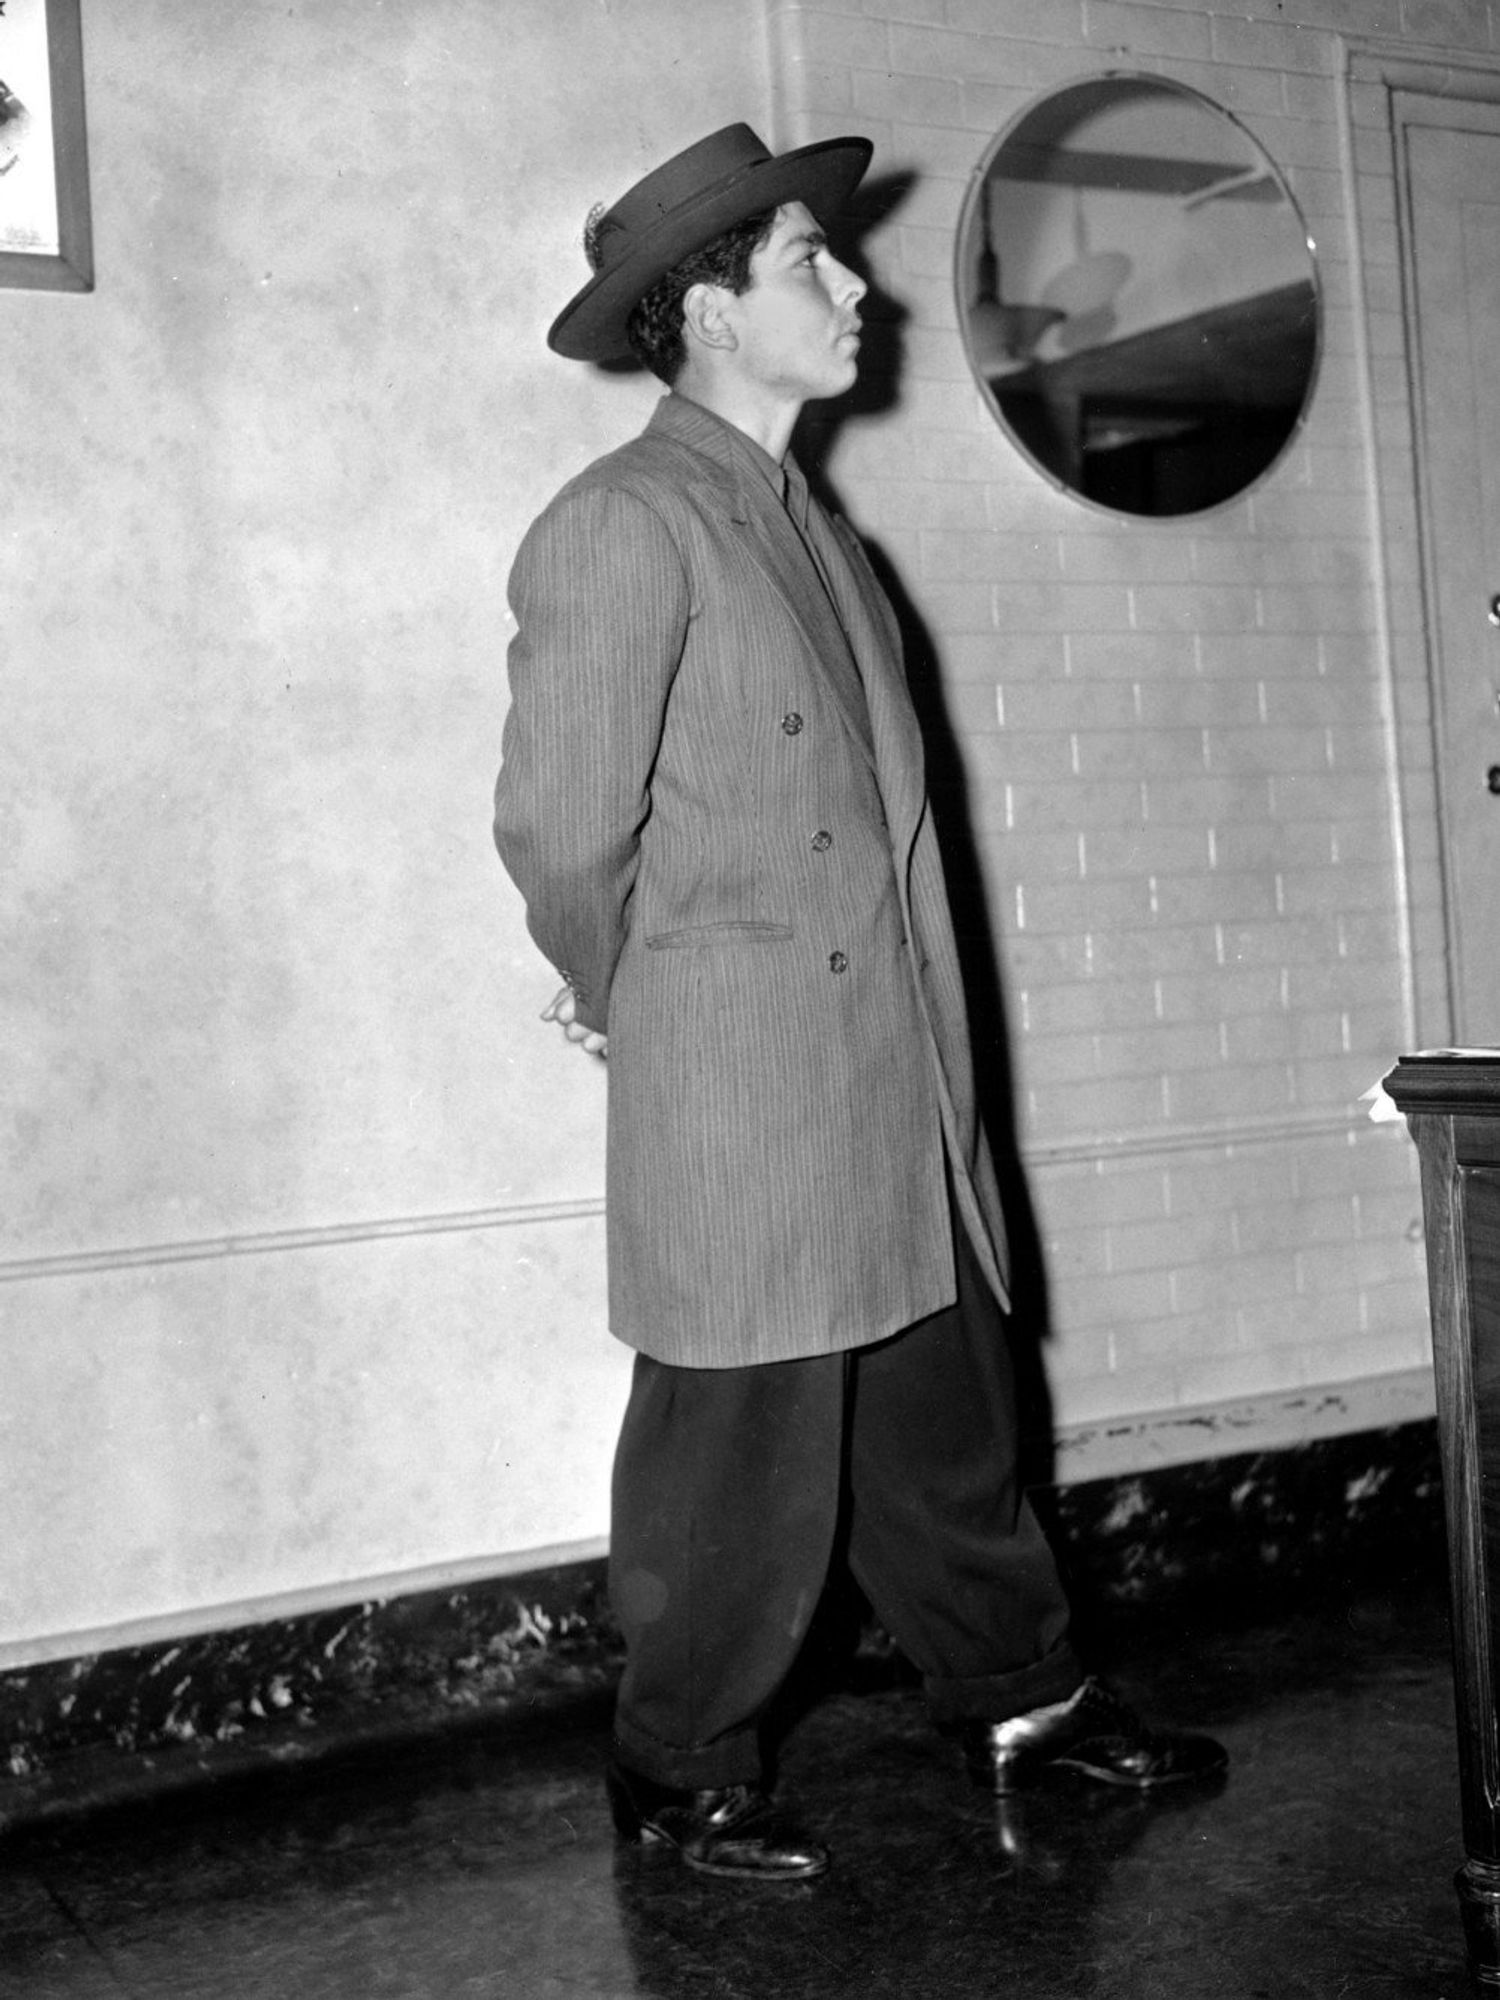 Black and white photo of a man in a zoot suit and pancake hat in a Los Angeles County jail during the Zoot Suit Riots in 1943.